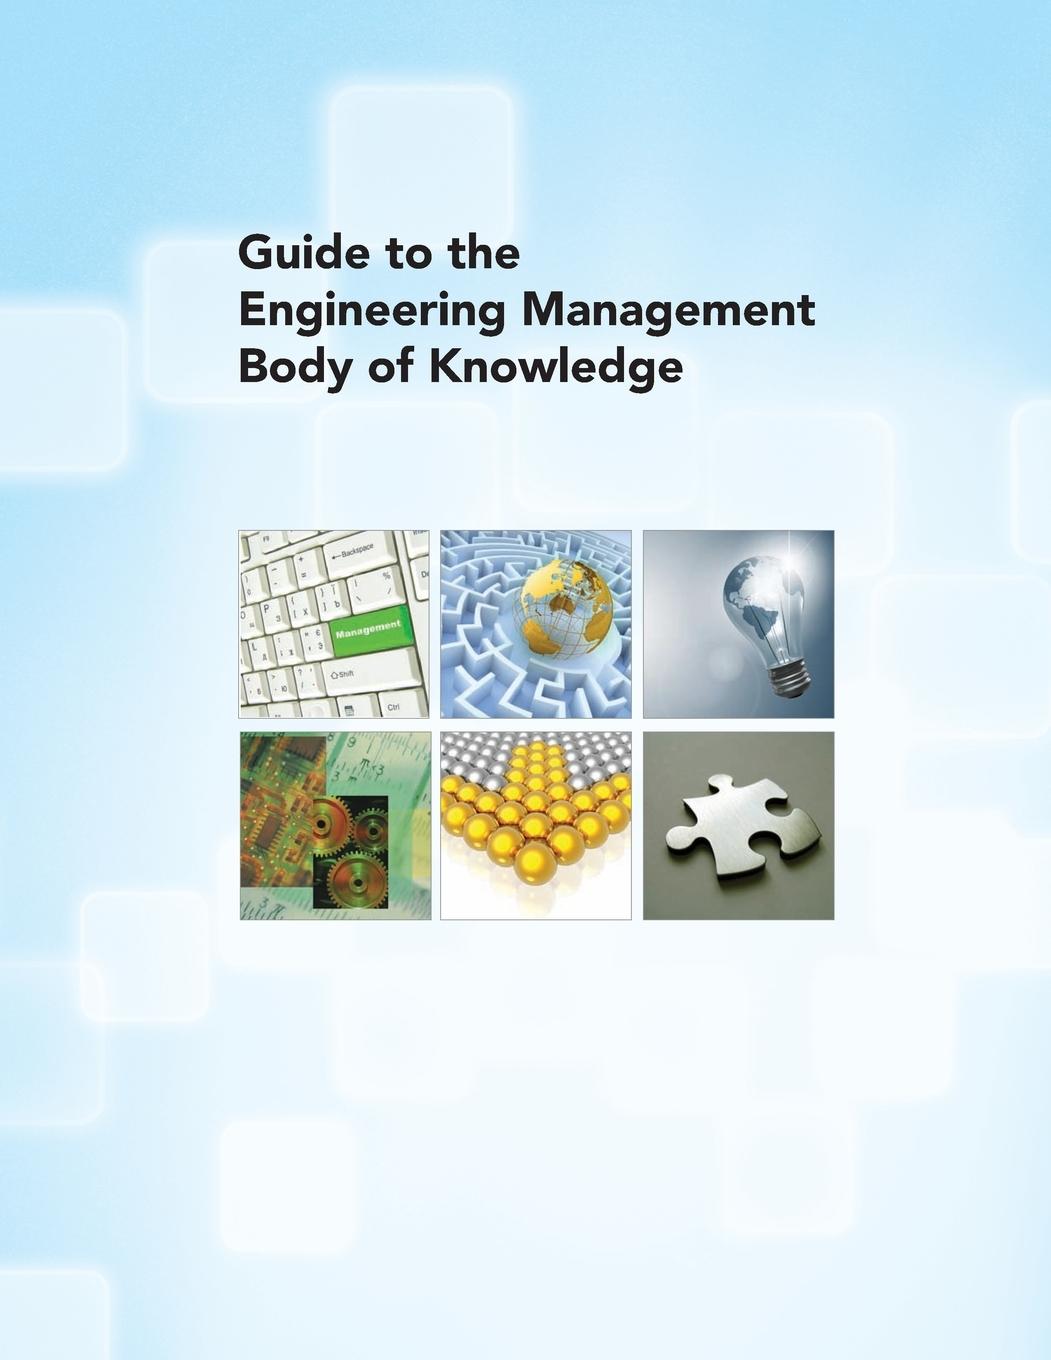 Guide to the Engineering Management Body of Knowledge - American Society Of Mechanical Engineers